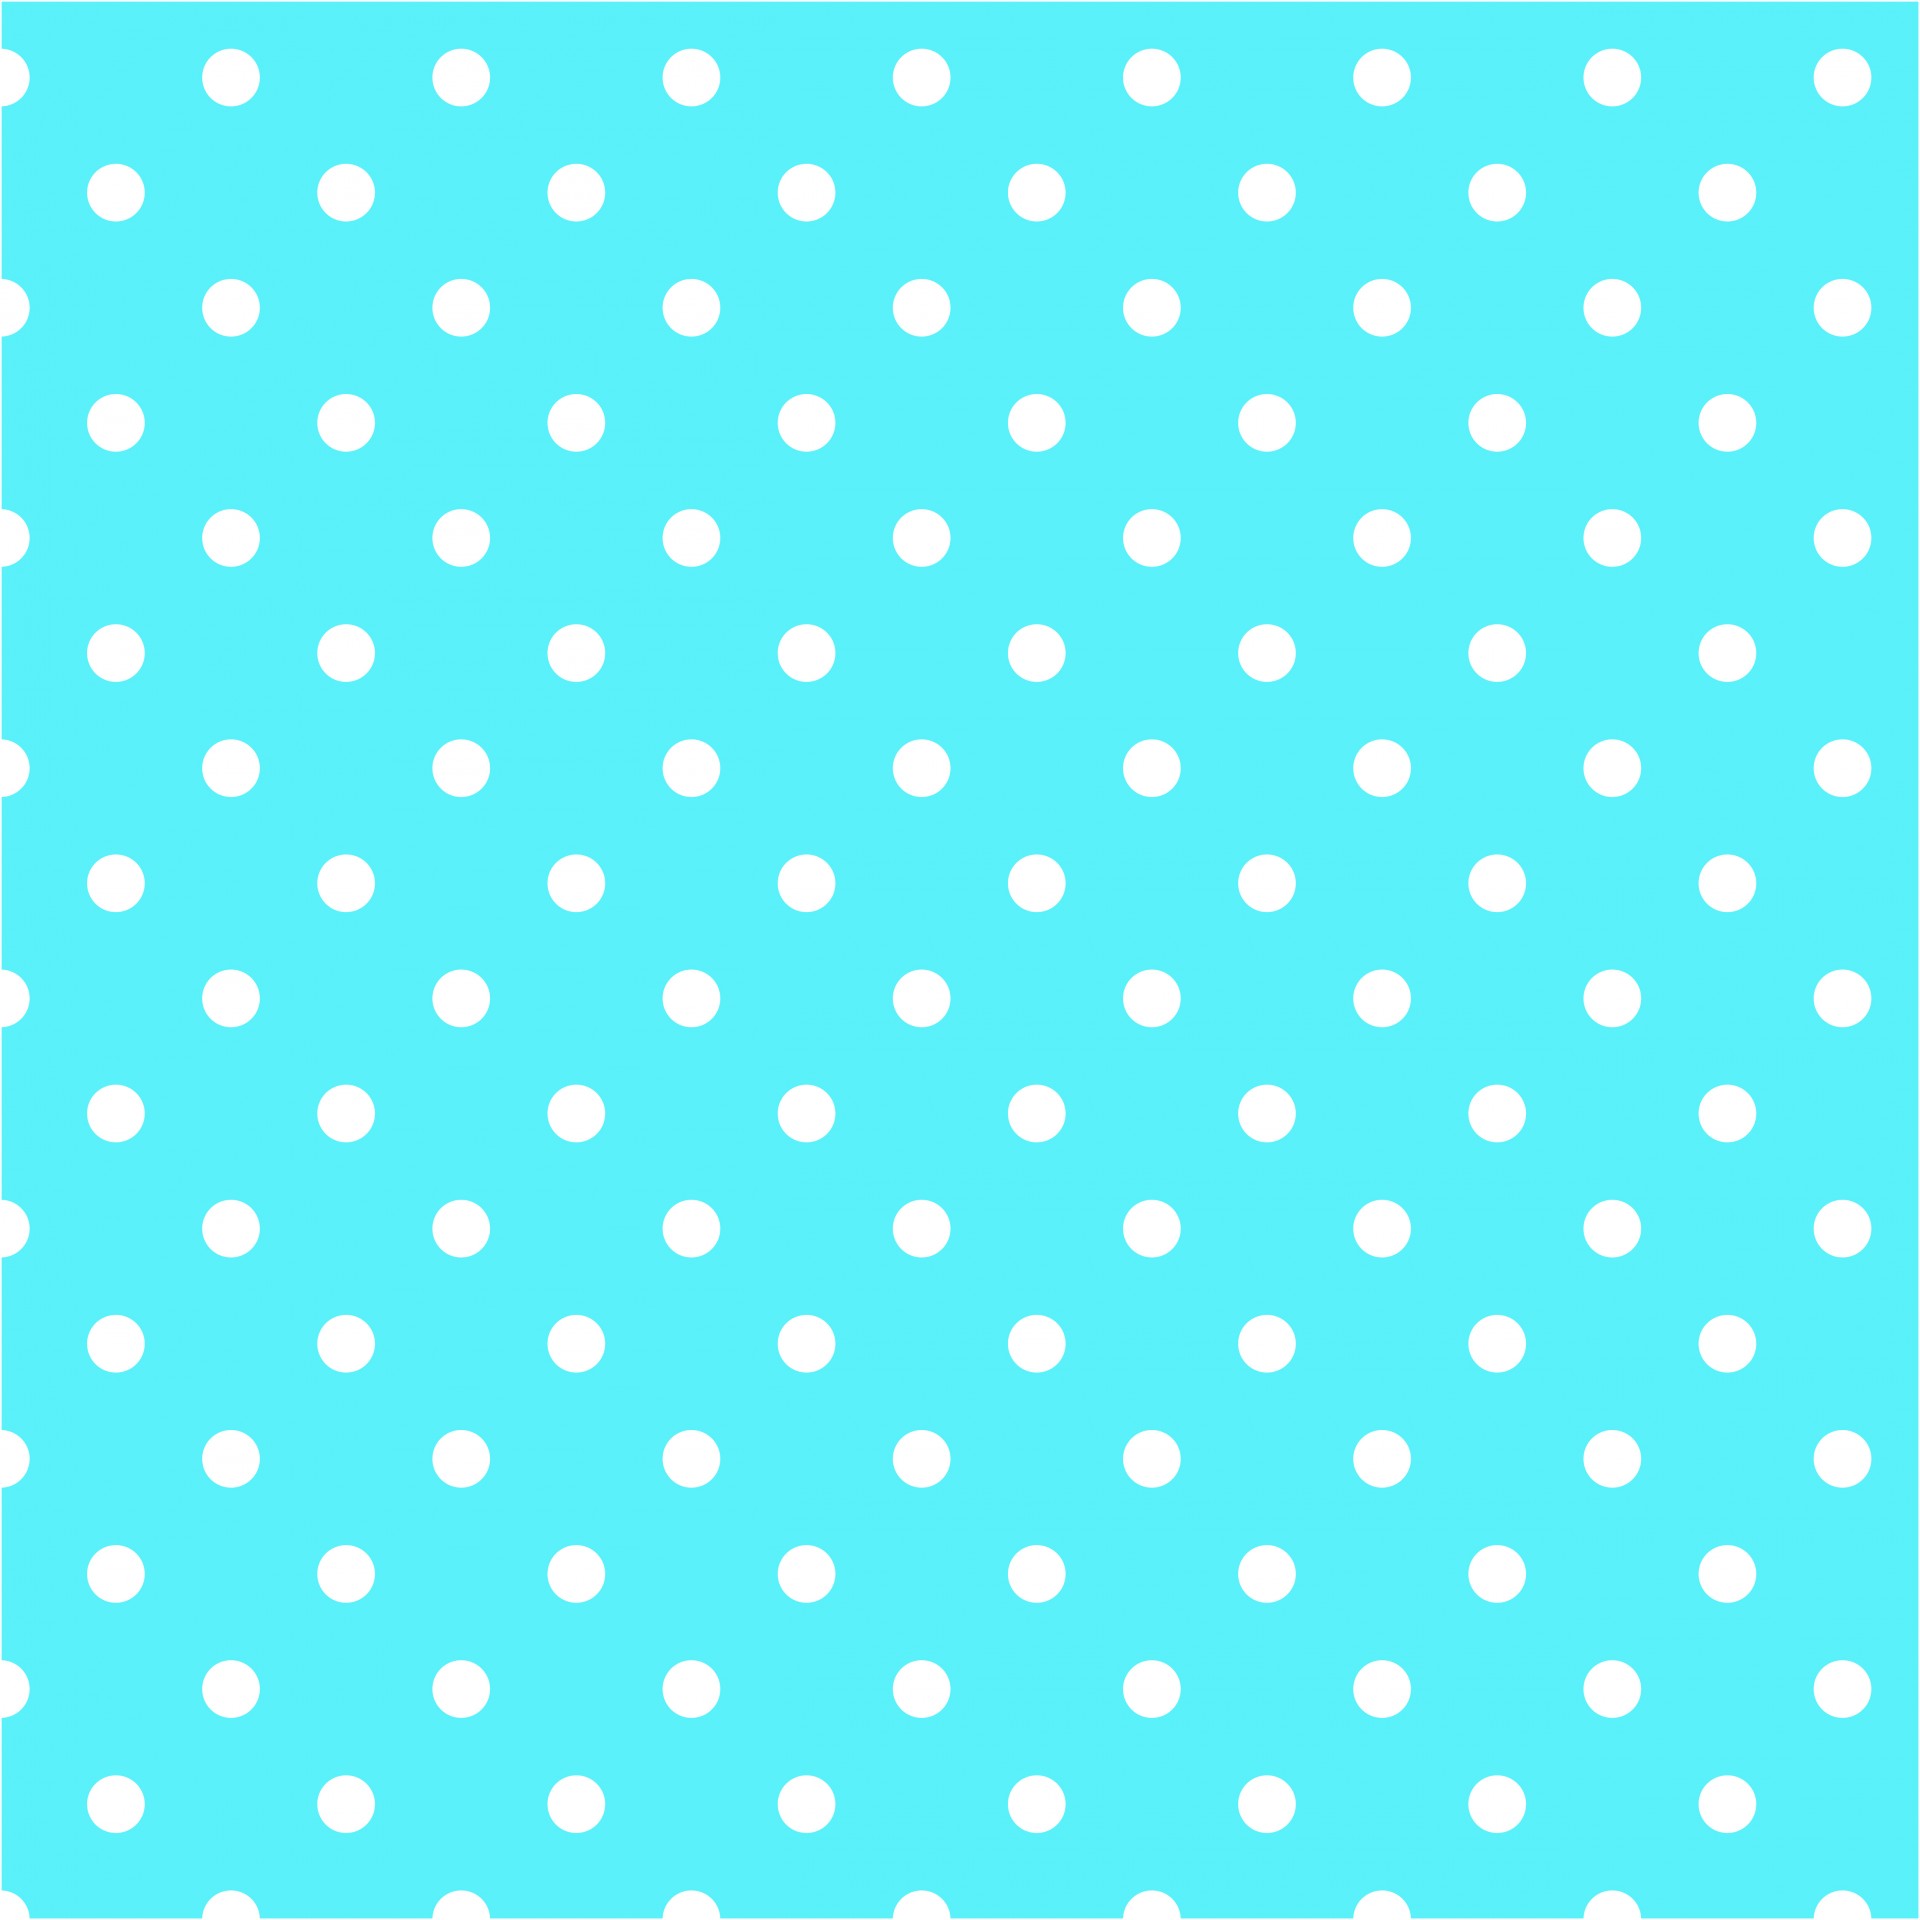 White polka dots on an aqua background for scrapbooking